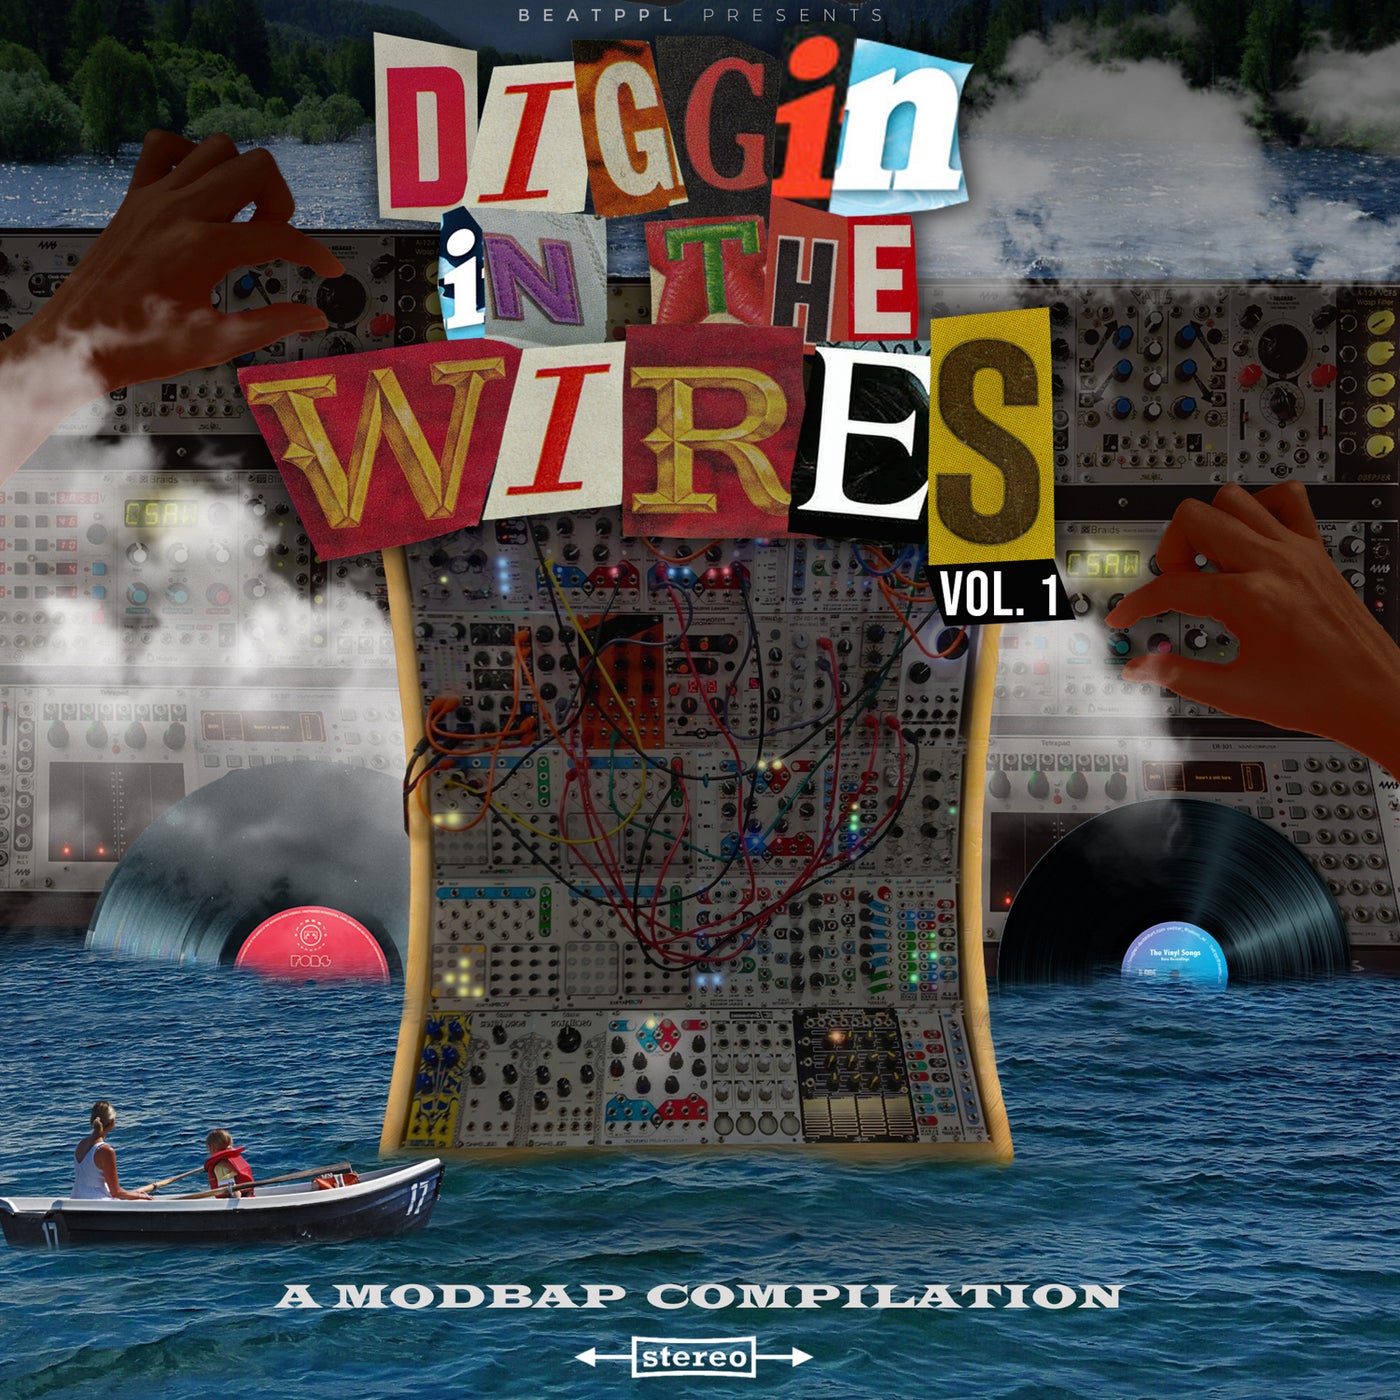 Diggin' In The Wires - Vol. 1